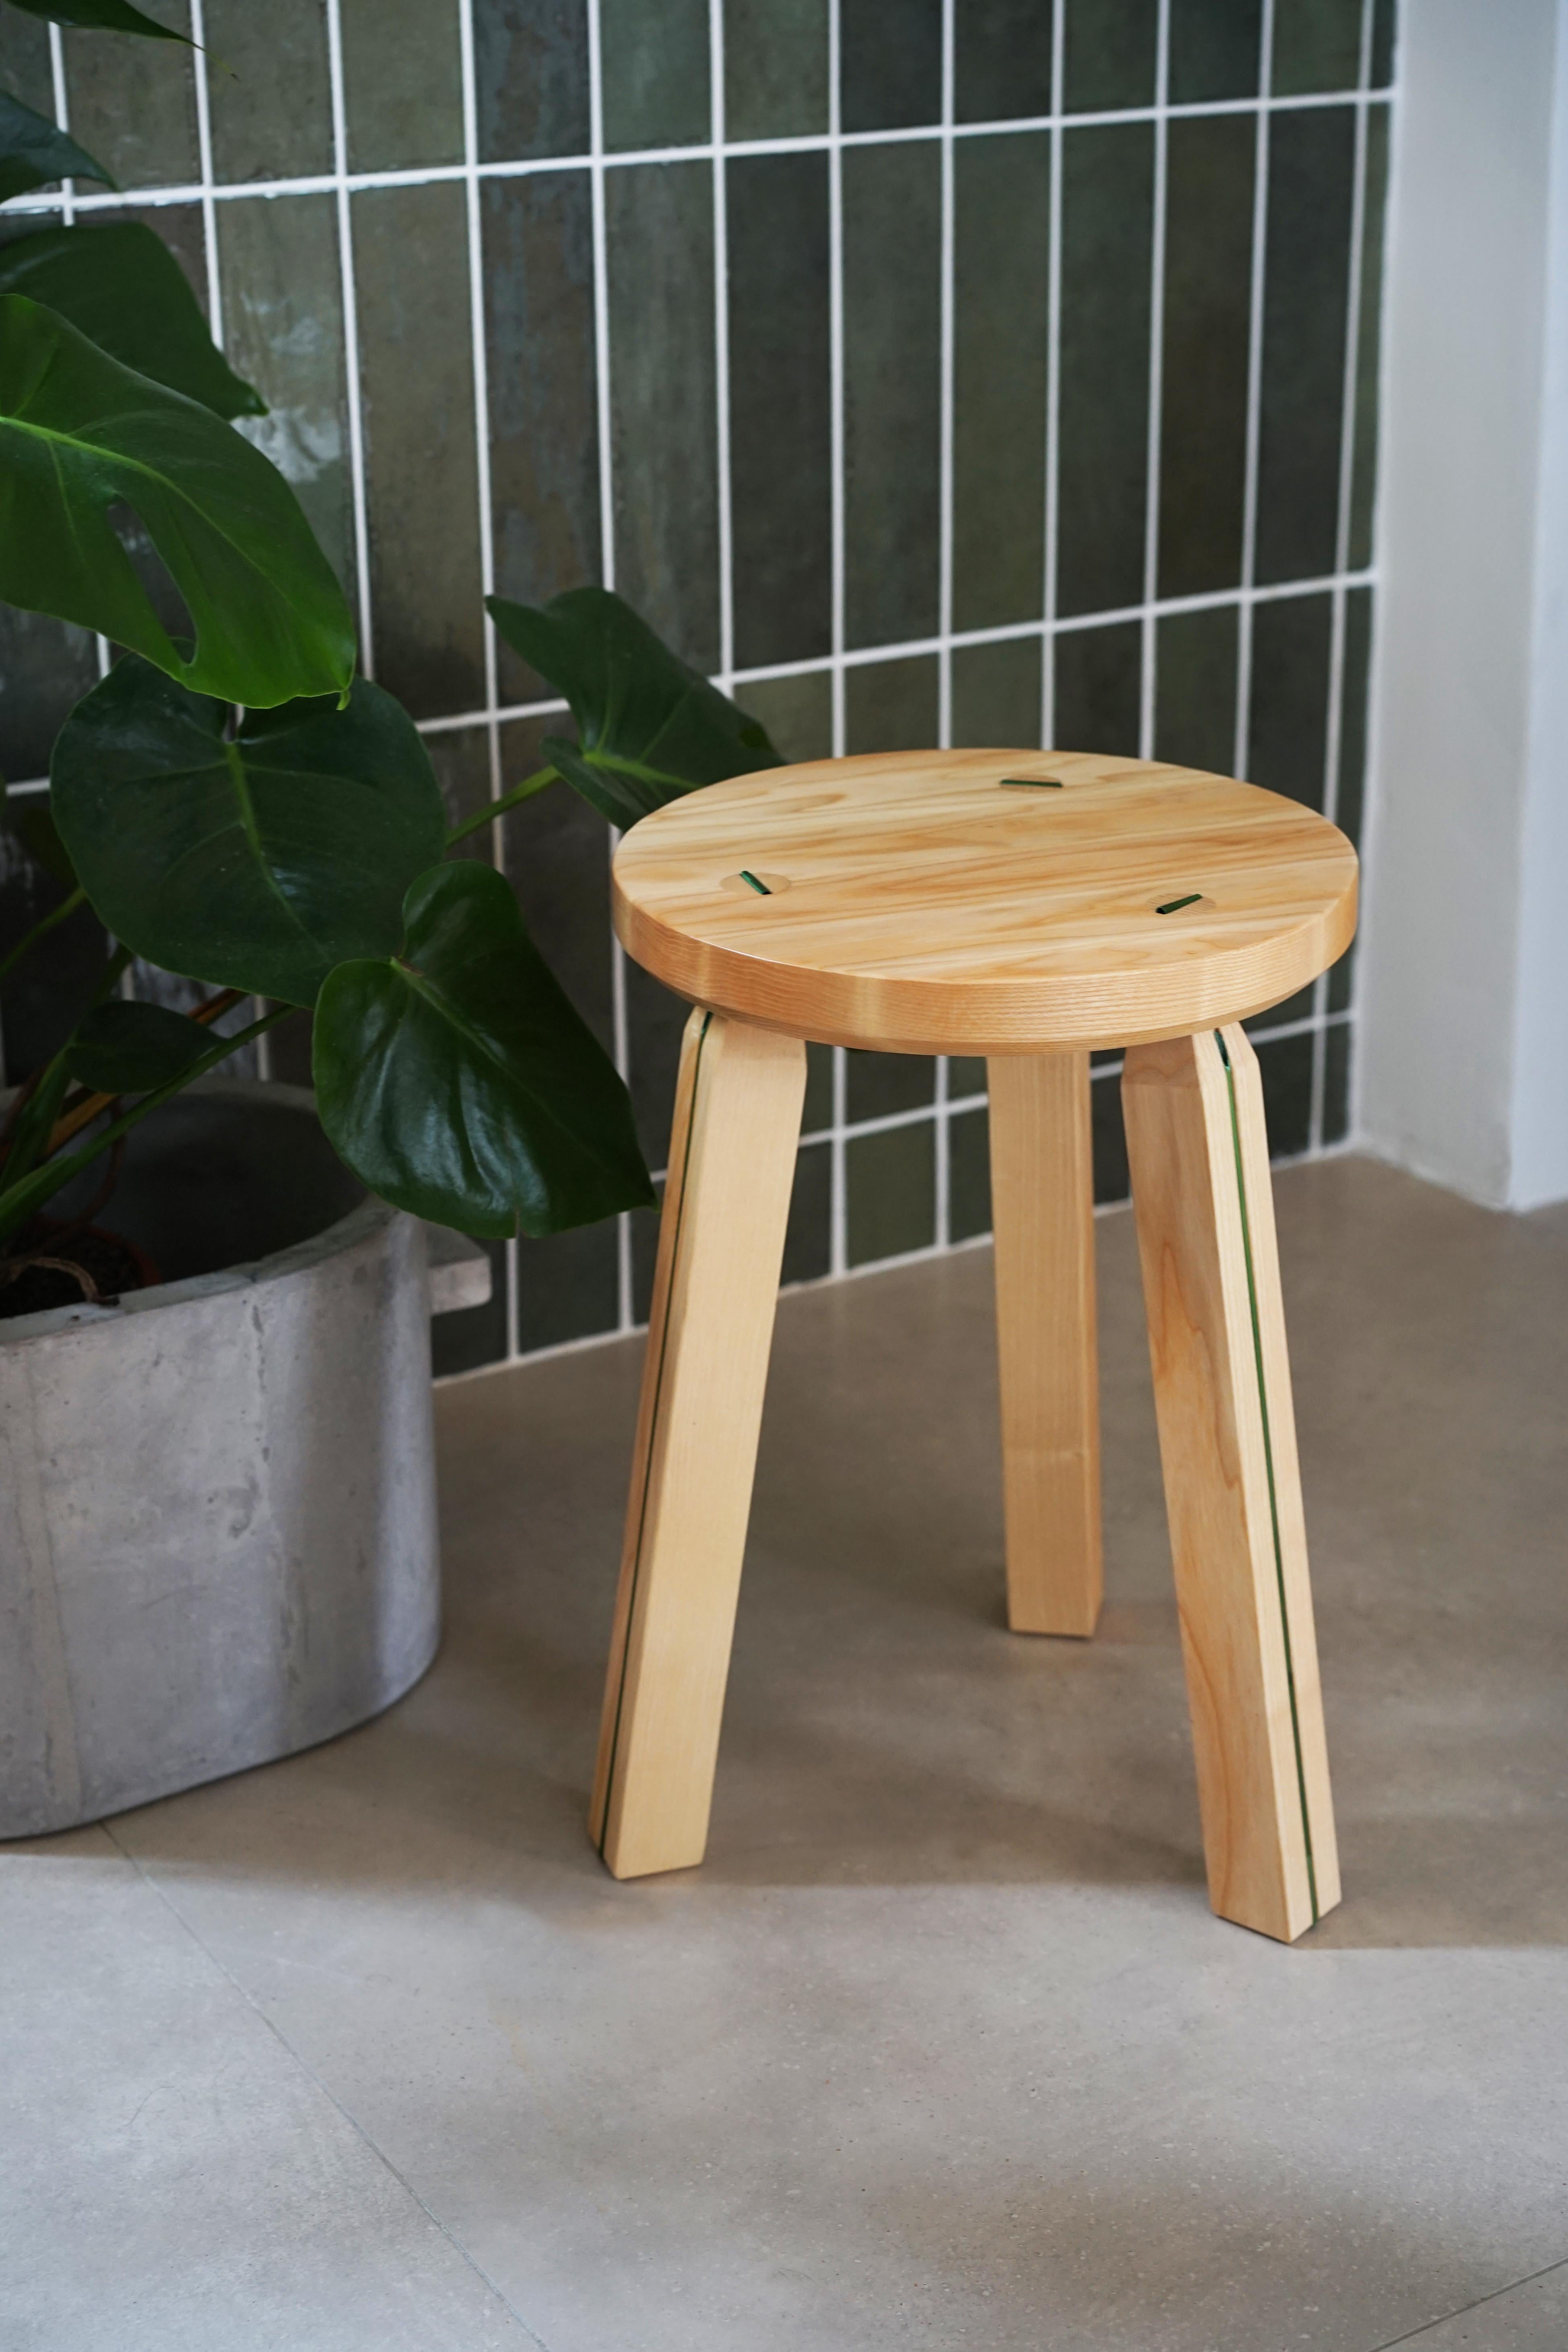 This low stool is inspired by the tripod stools traditionally used in rural settings. The tinted rye straw comes to find refuge on the legs and the seat, winking at the straw marquetry and the wedge which can reinforce the tenon of the legs.

Also